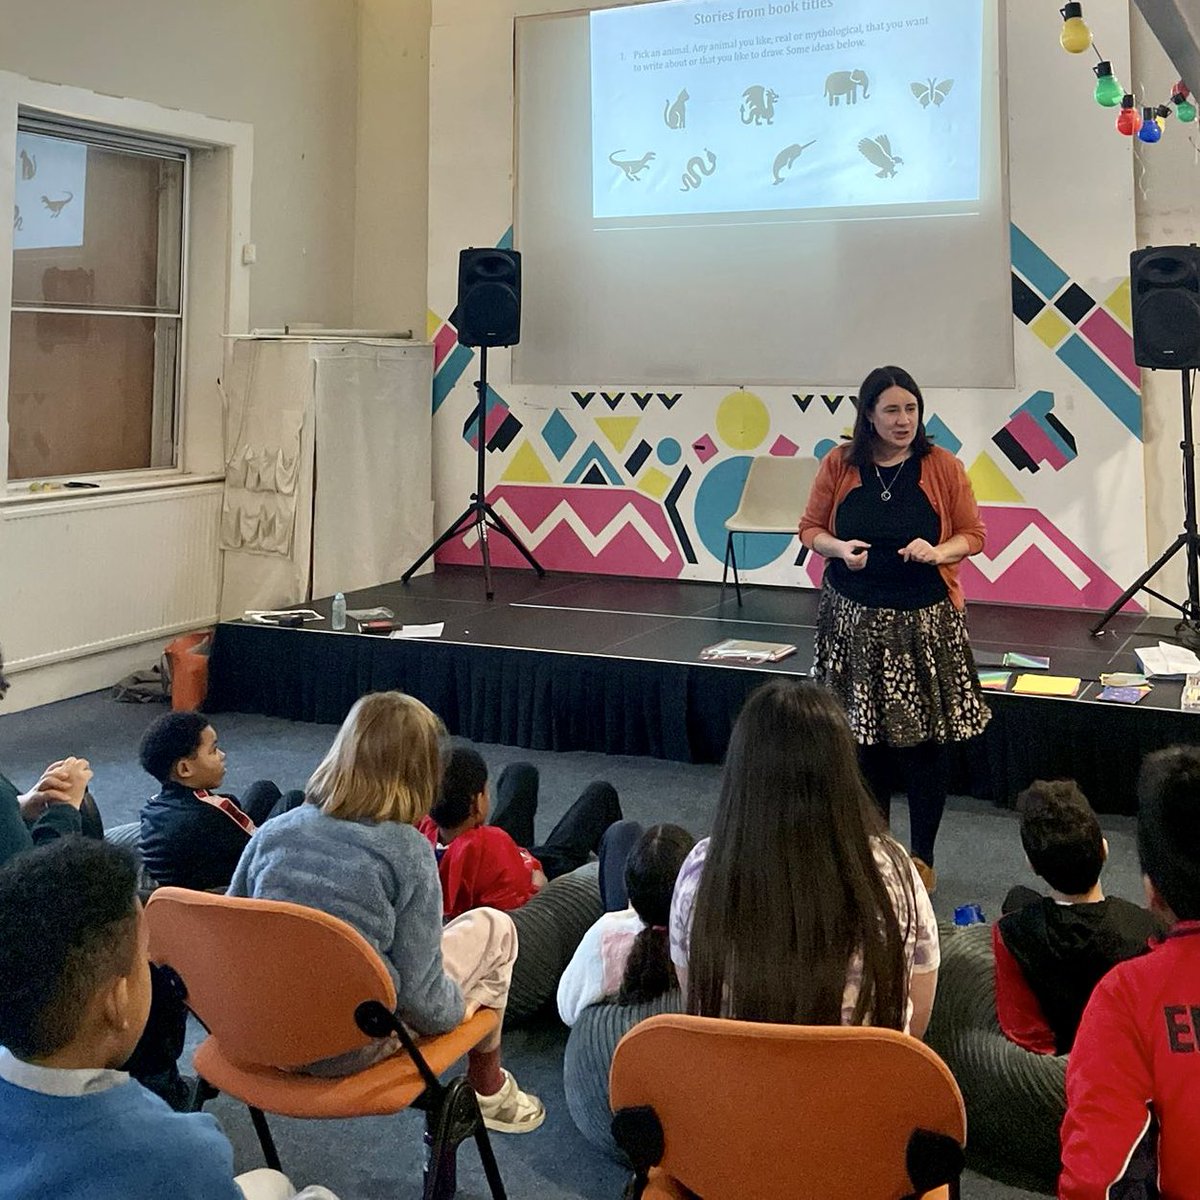 Fab #halfterm fun @stories_fest ‘Write Club’ with the brilliant @jonesgarethp @AliceHemming1 @tibolota & Camilla Chester Two days of free writing & illustration workshops for kids from low income Lambeth families So impressed by the kids’ creative talent & imaginations 🙌📚💕